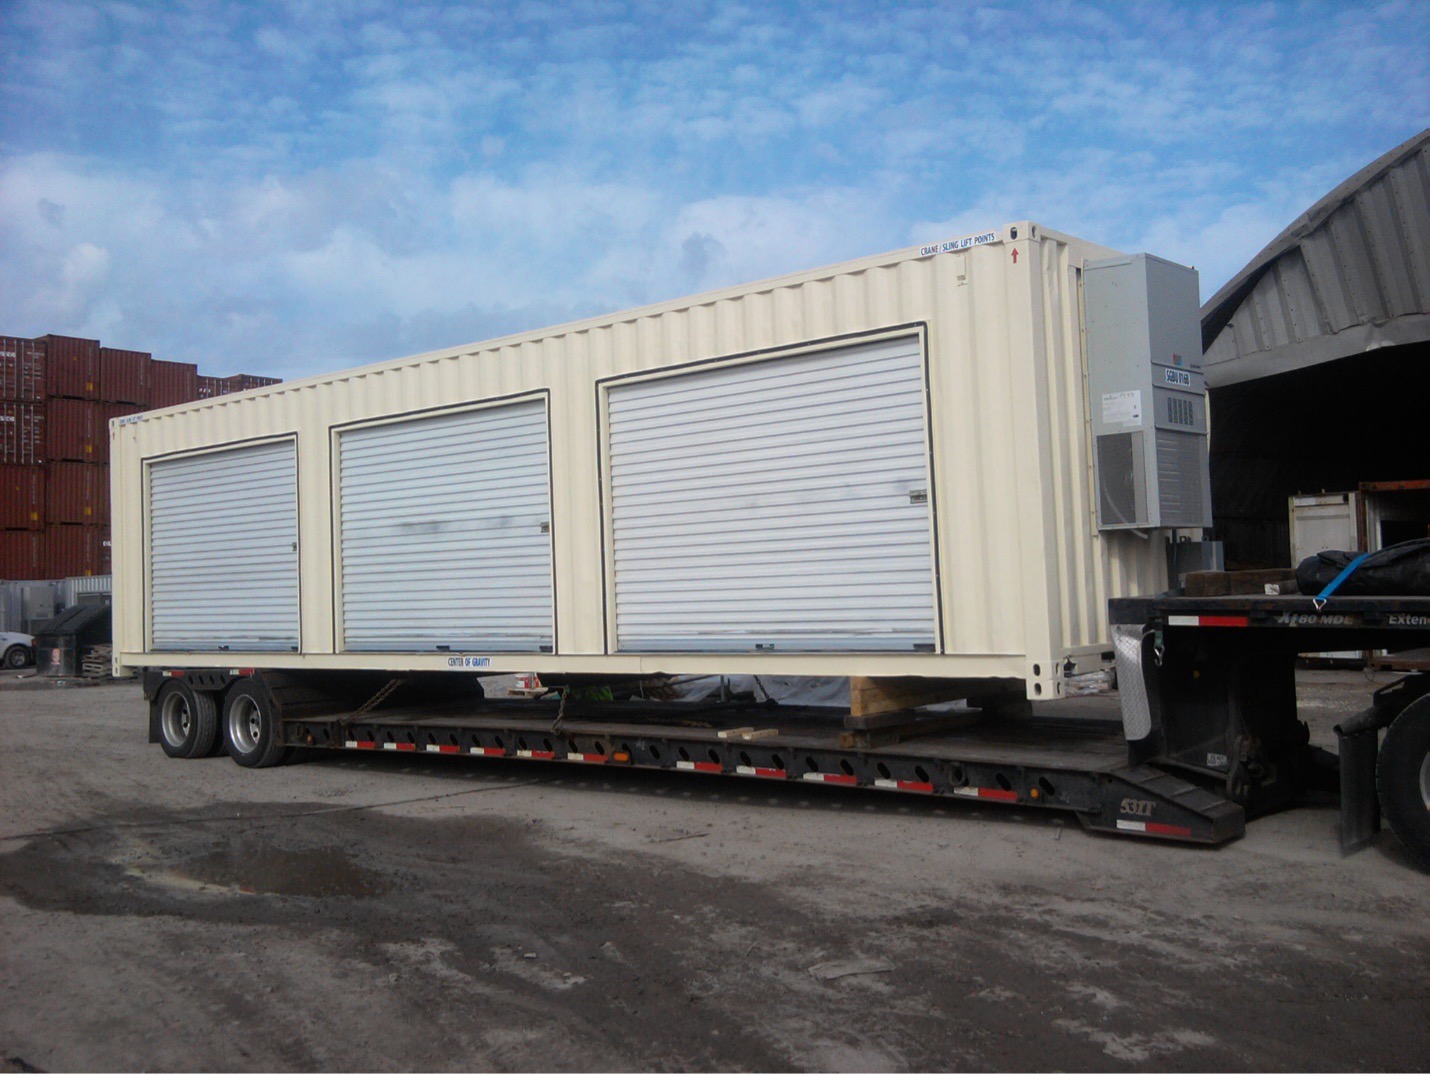 <div>Safe & Green Holdings Receives Expanded Scope of Work for Contract with Government Contractor to Refurbish 15 Container Modules for a Major U.S. Agency</div>